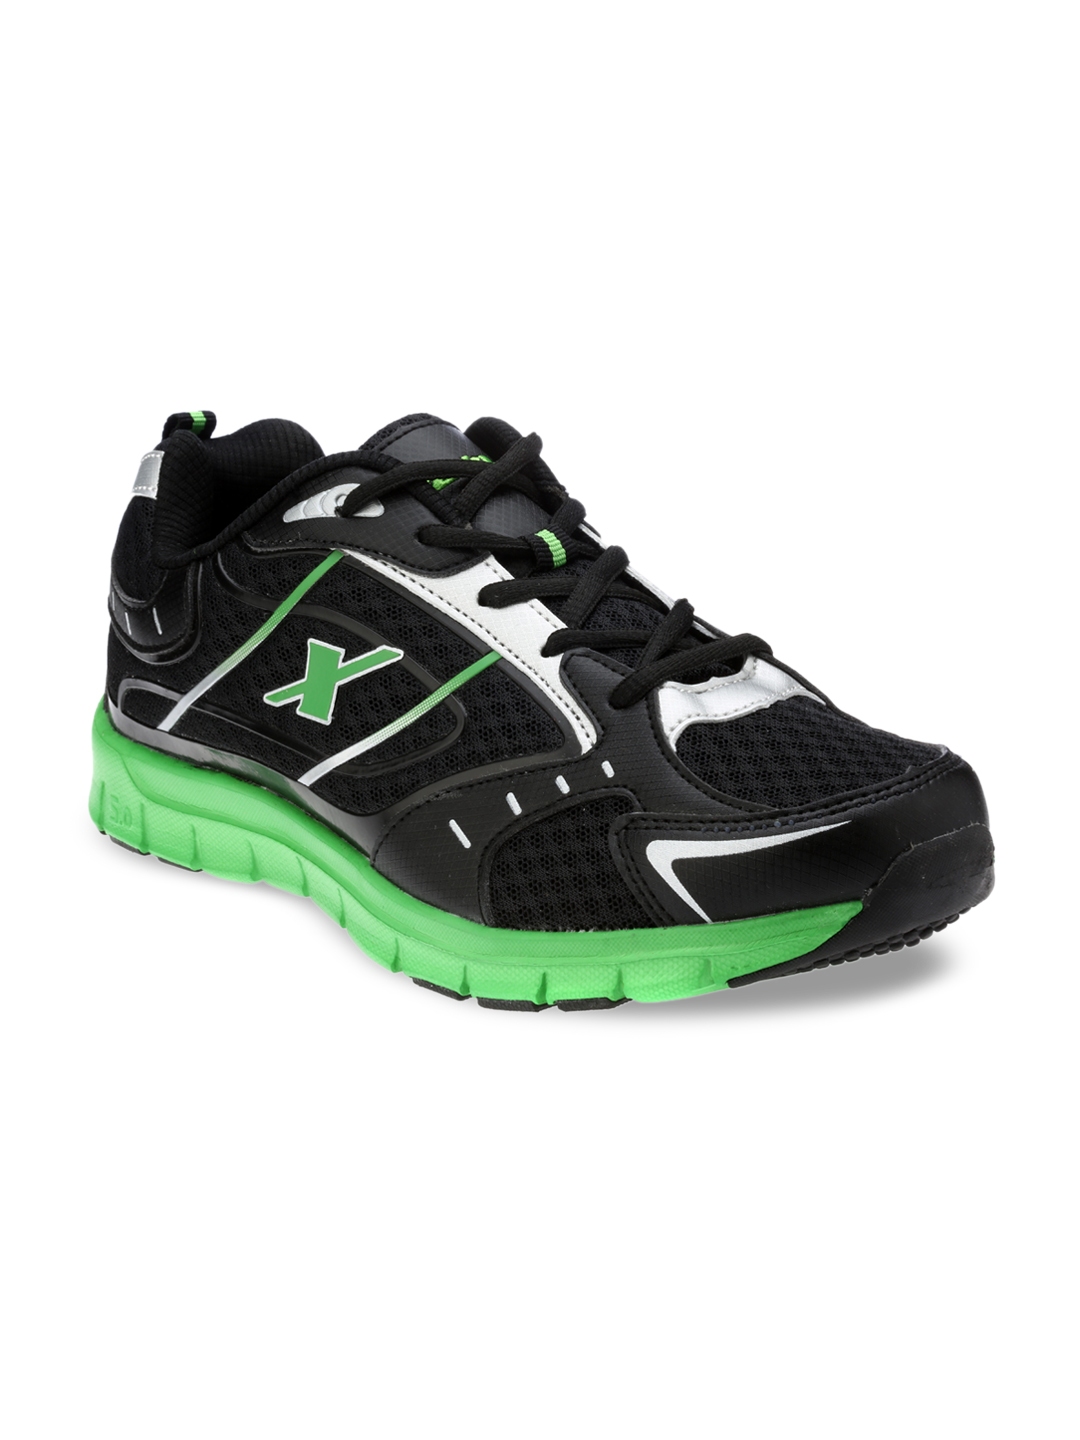 sparx shoes new model 219